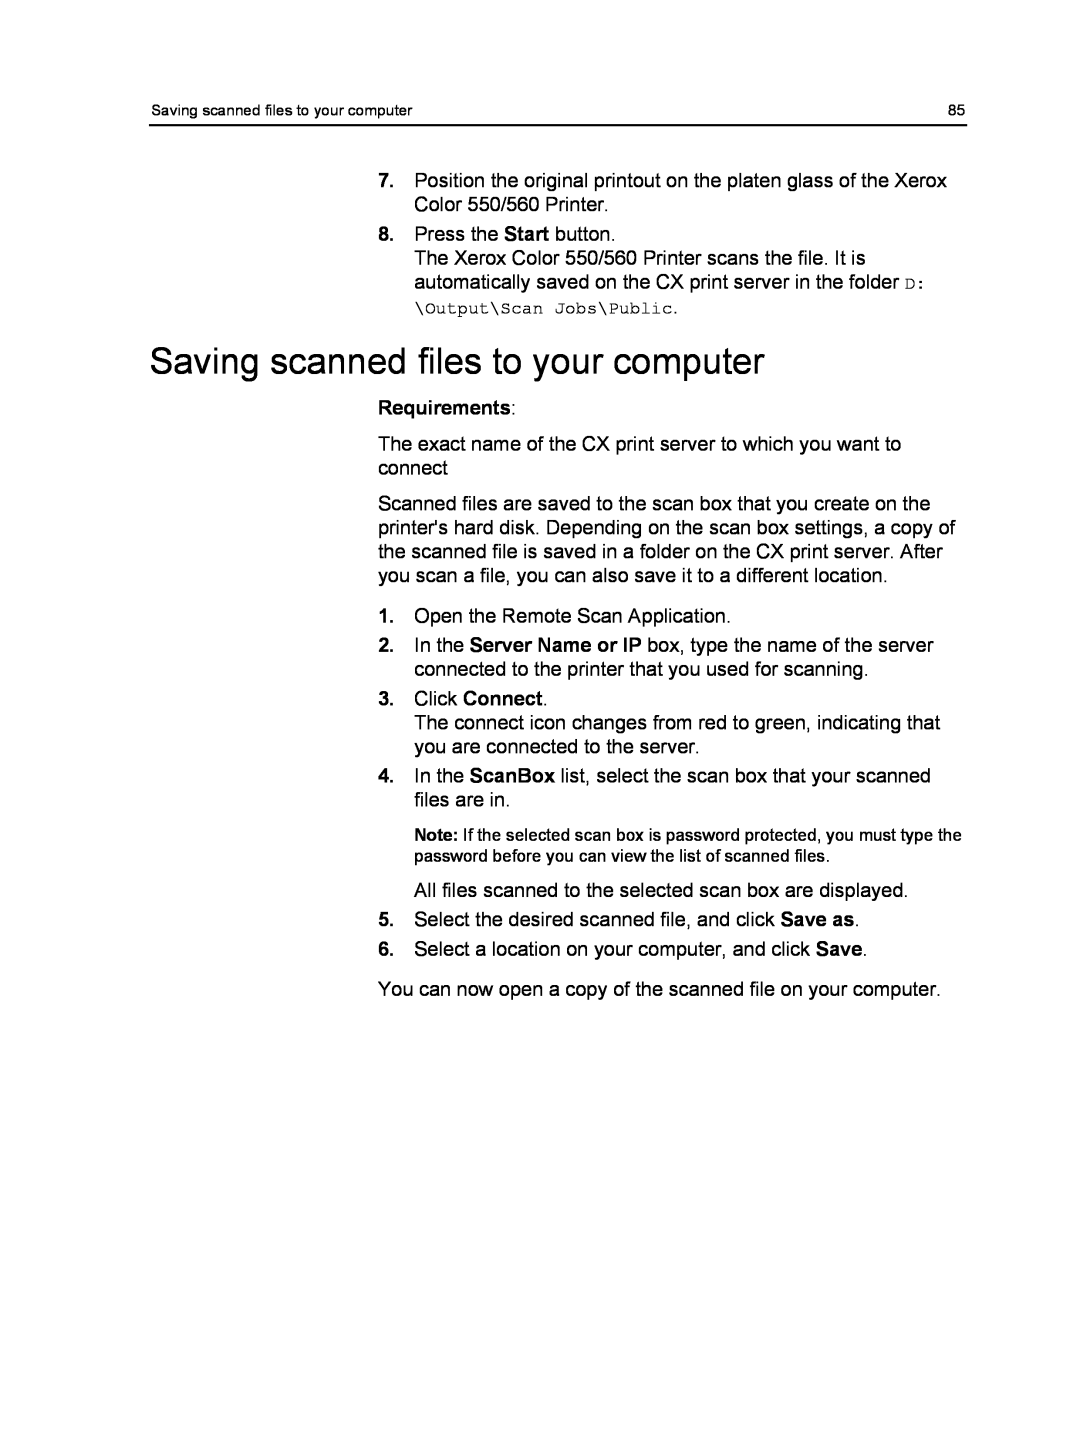 Xerox 550, 560 manual Saving scanned files to your computer, Requirements 